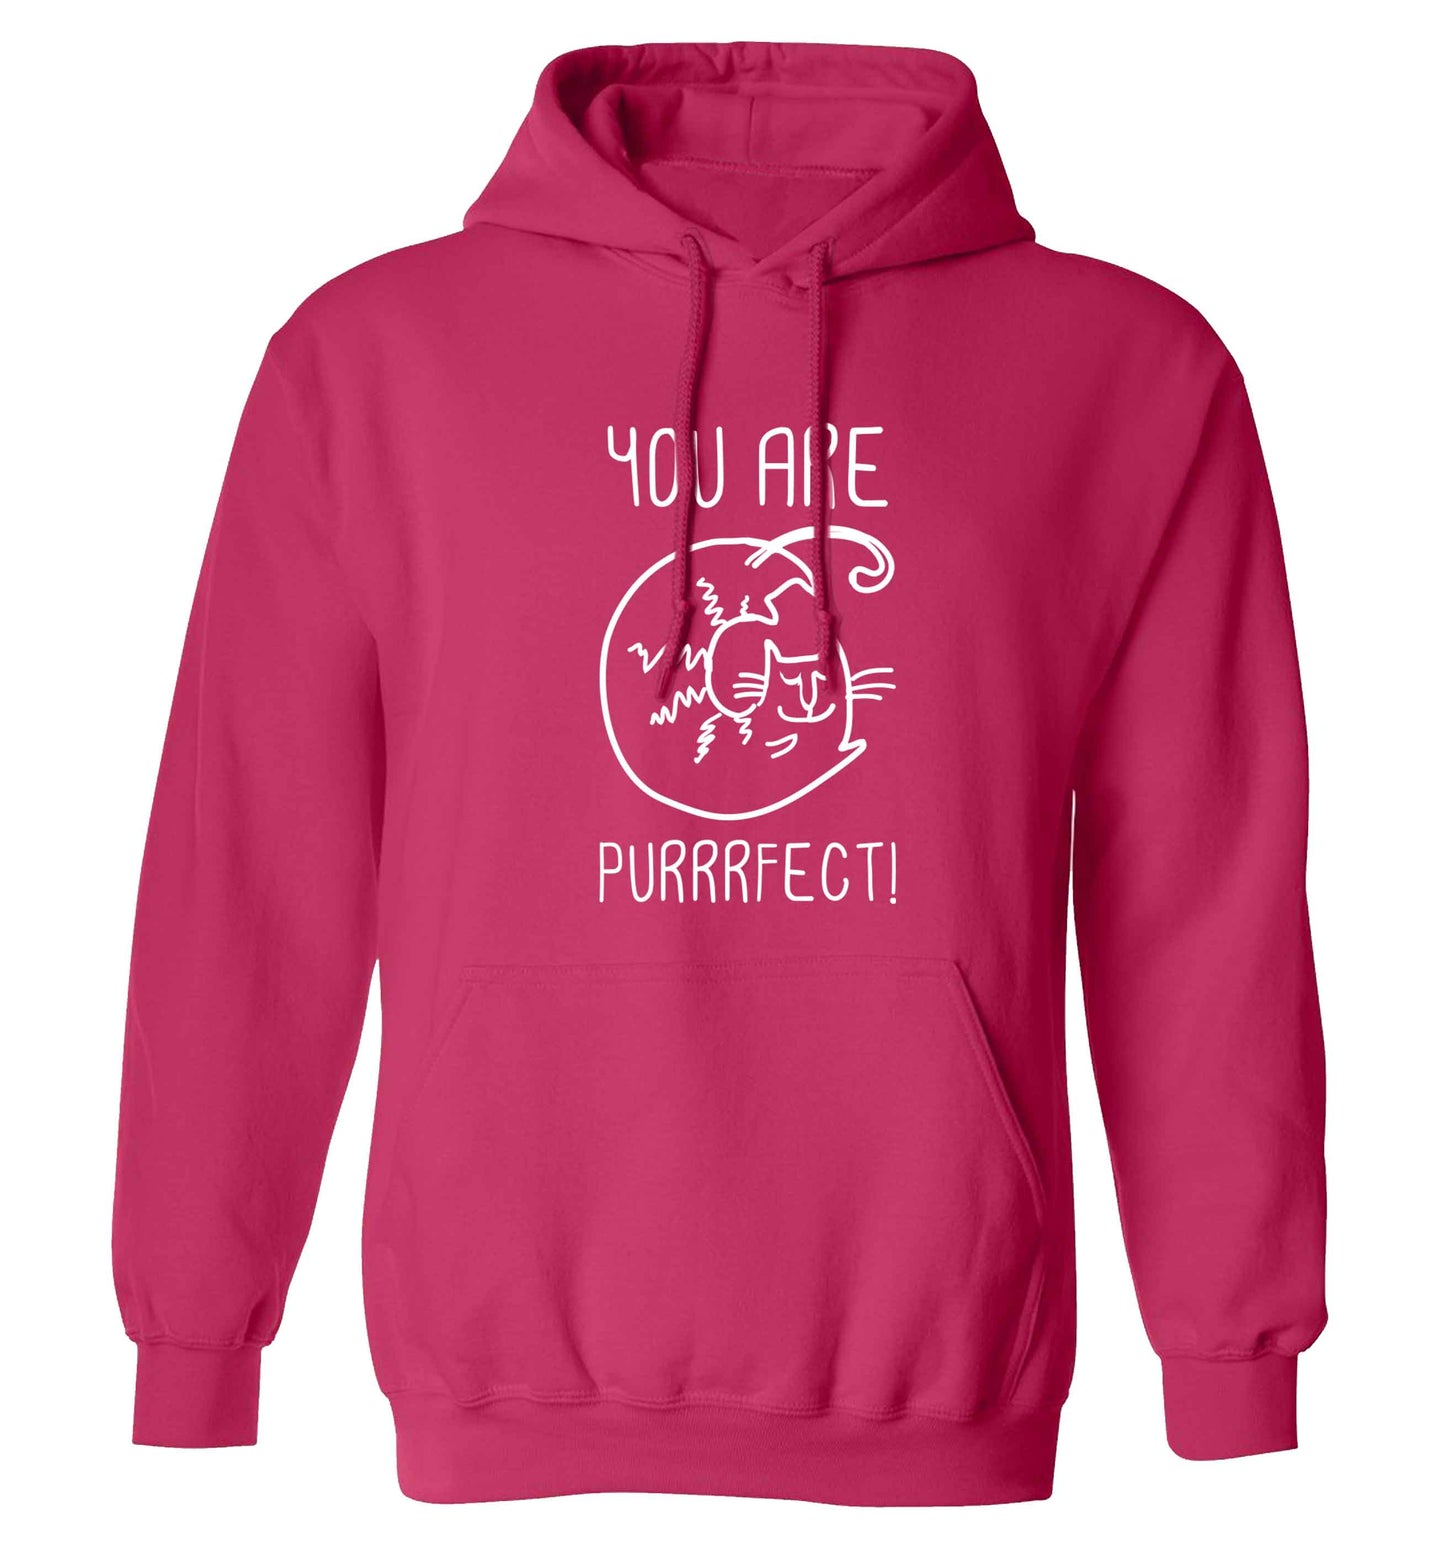 You are purrfect adults unisex pink hoodie 2XL